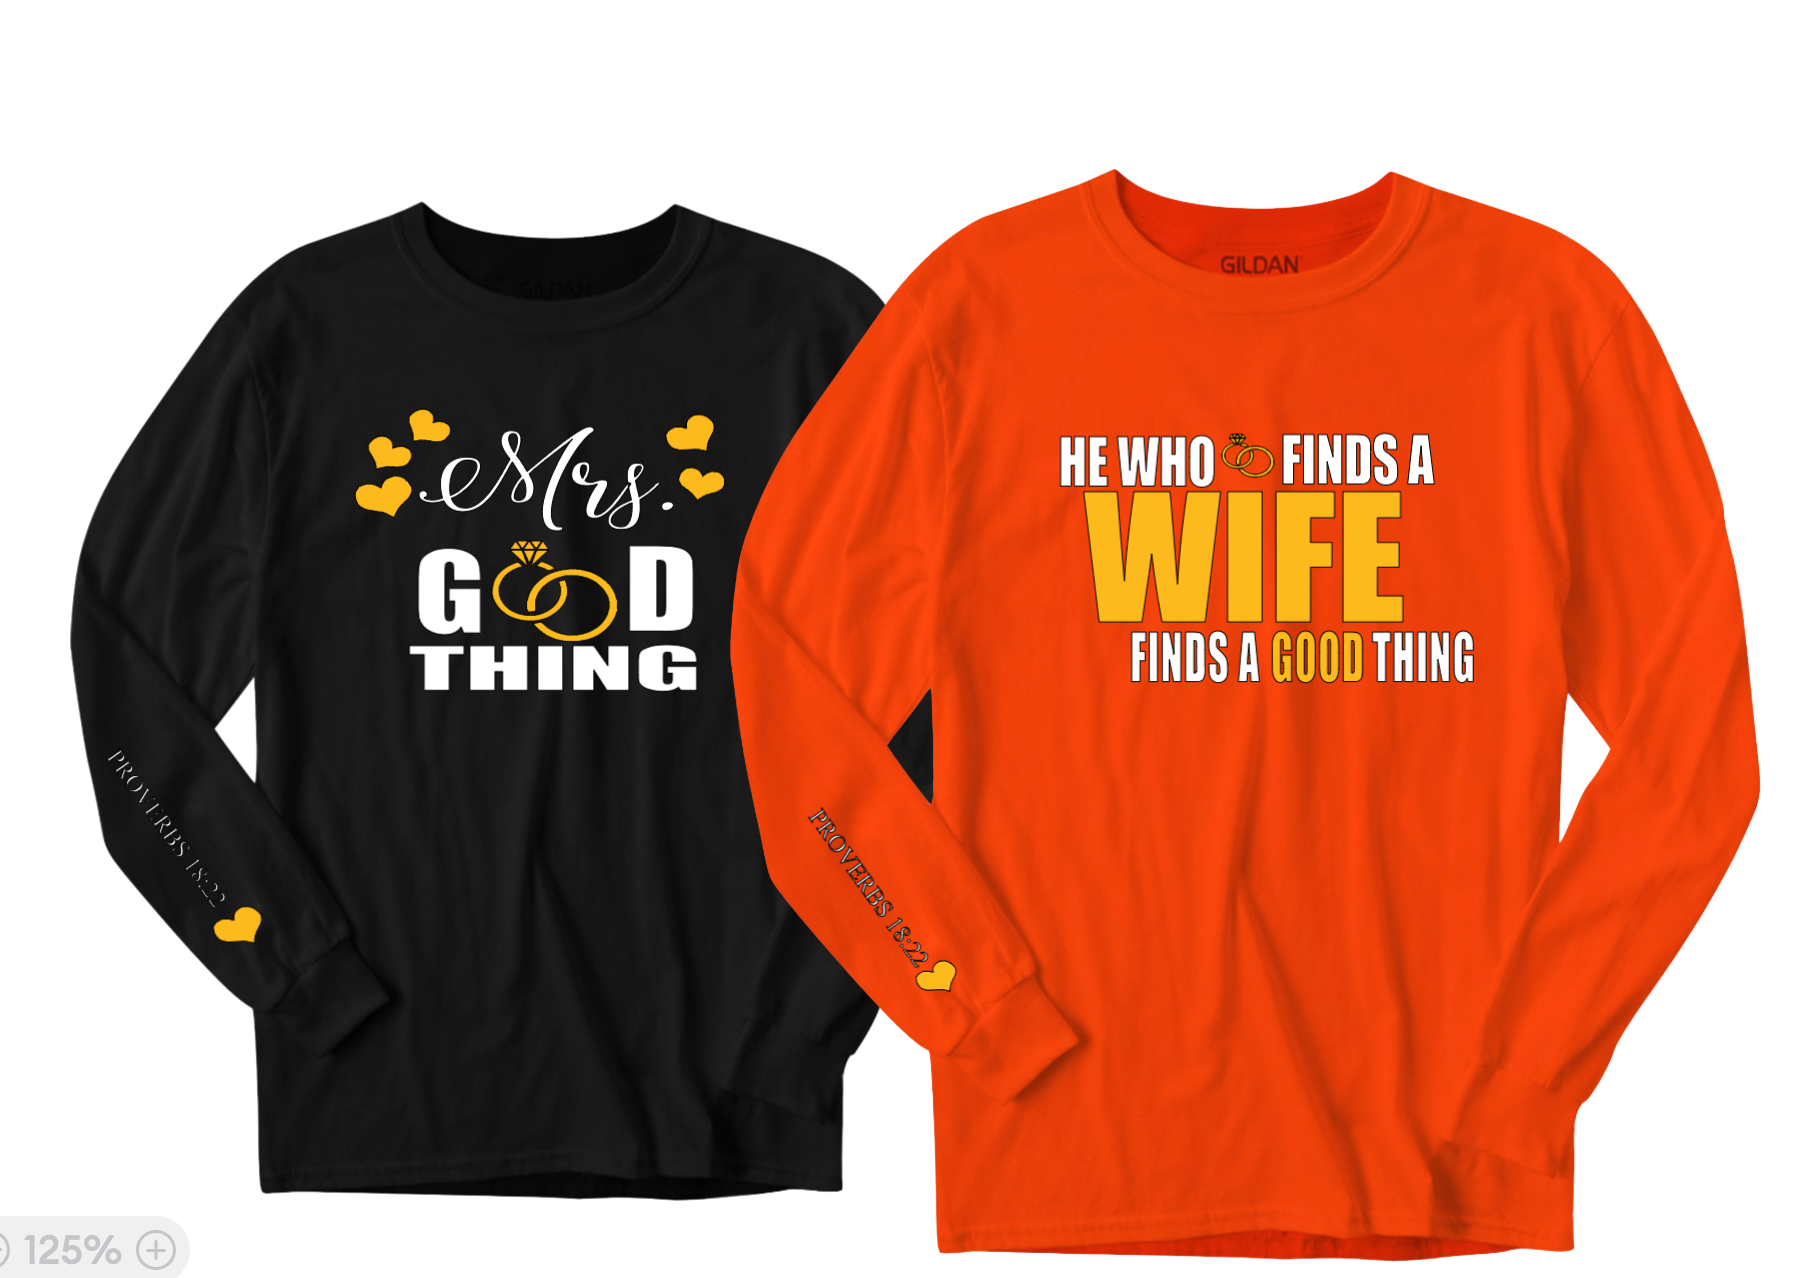 Mr & Mrs. Good Thing Couples Unisex Long-sleeve T-shirt - Prominent Styles of Sorts- PSS!